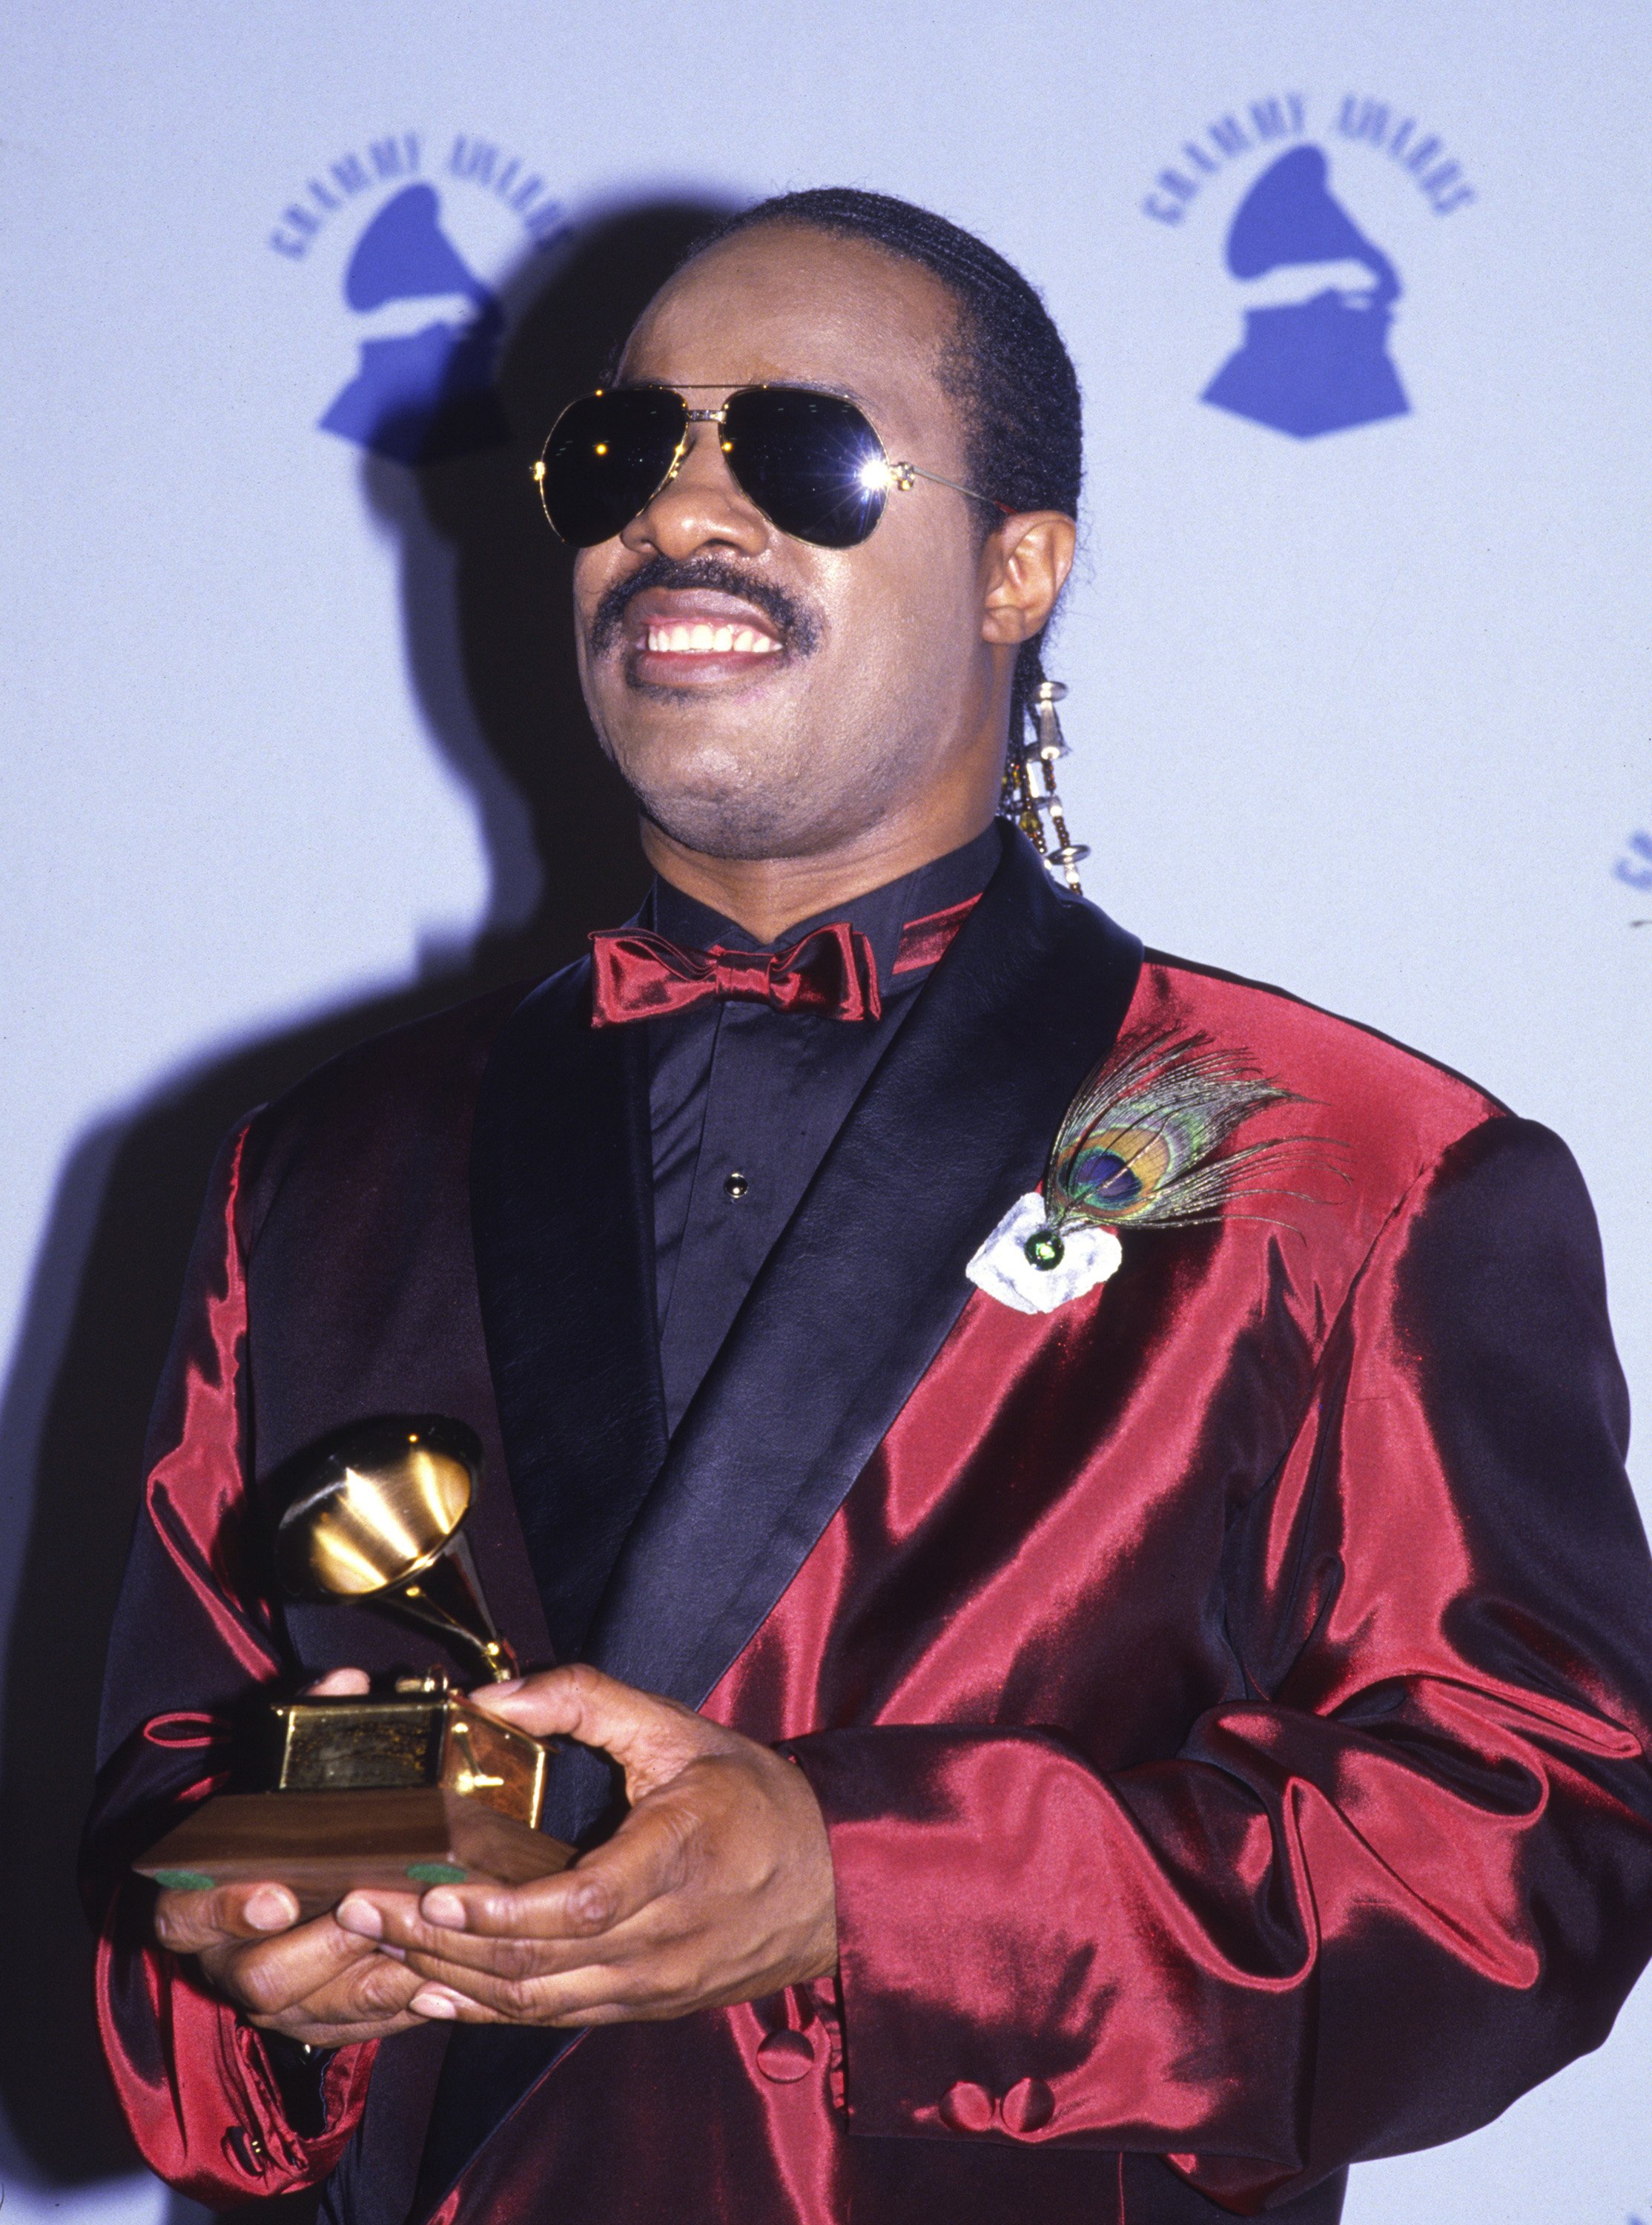 Stevie Wonder at the 1986 Grammy Awards | Source: Getty Images